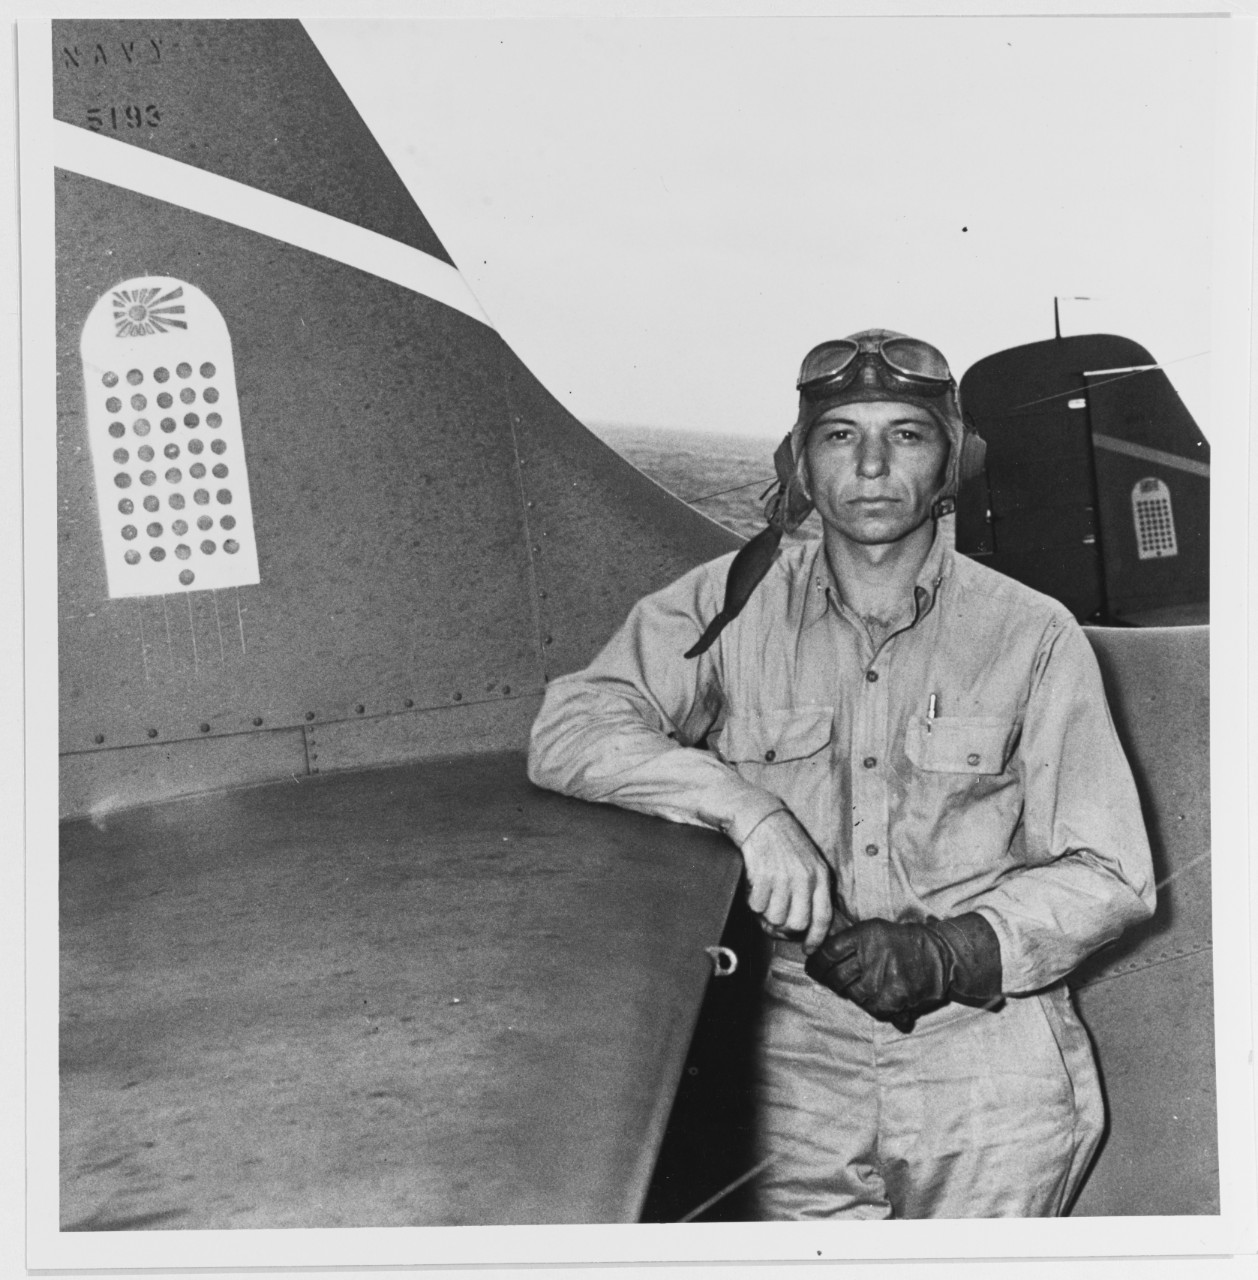 Machinist Donald E. Runyon of VF-6 leans on his F4F-4 Wildcat (BuNo. 5193) on board Enterprise, 10 September 1942. The tombstone on his plane’s tail contains 41 Rising Sun symbols for the Japanese aircraft that the squadron claims to shoot down by this point in the war. Runyon is eventually credited with 11 kills, and receives the Navy Cross and Distinguished Flying Cross. (U.S. Navy Photograph 80-G-11103, National Archives and Records Administration, Still Pictures Branch, College Park, Md.)